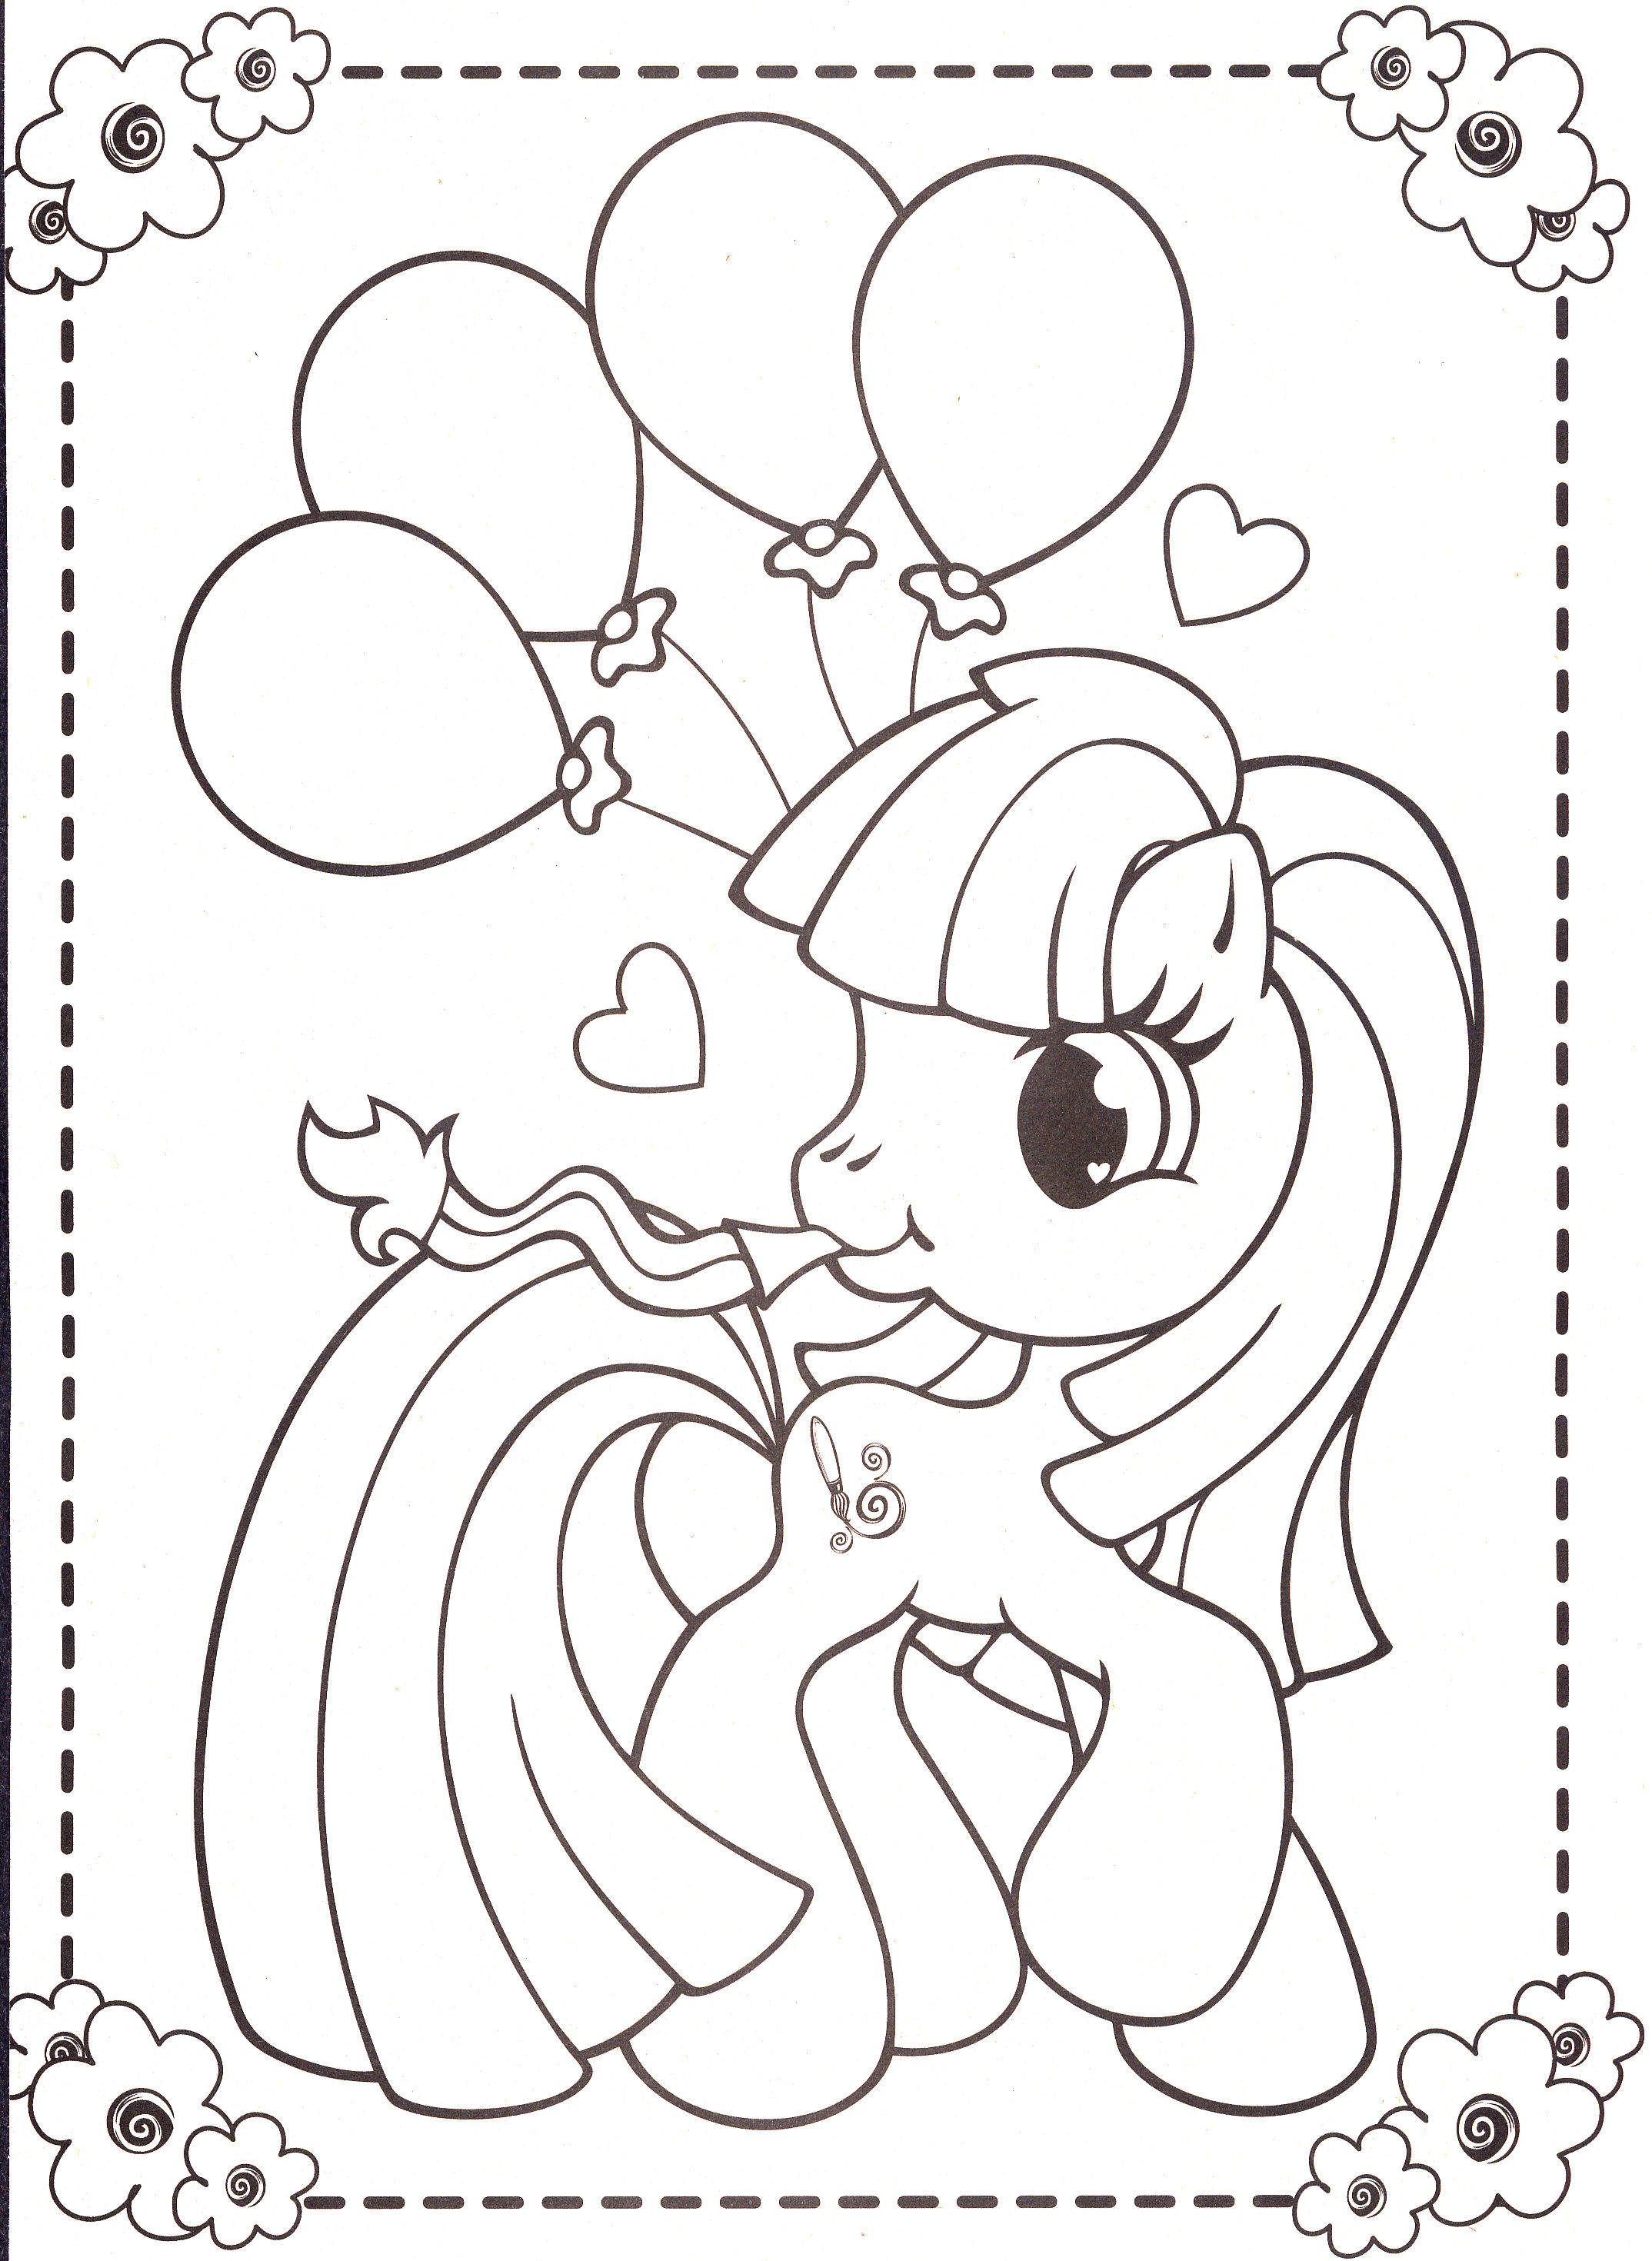 my-little-pony-coloring-pages-45 | Flickr - Photo Sharing!